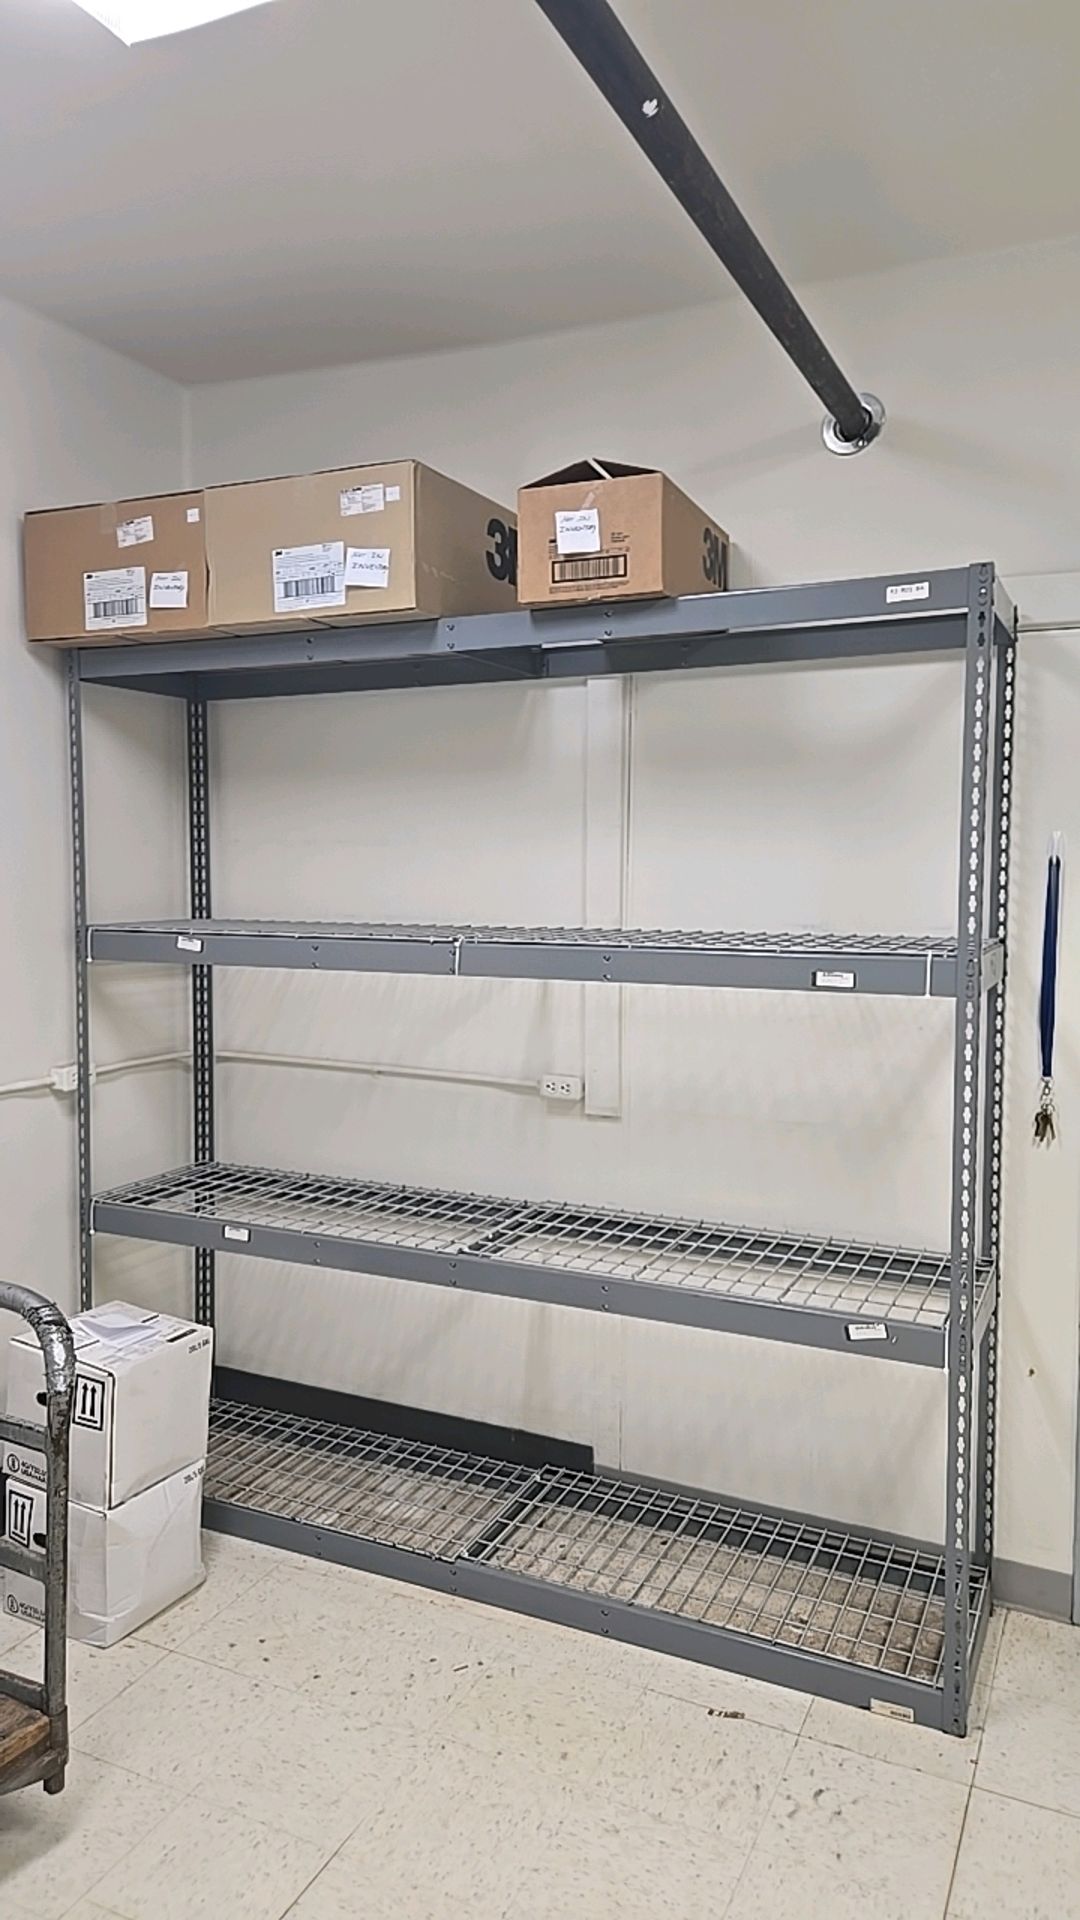 METAL FRAME WIRE SHELVING RACK SYSTEM, QTY. (4) CONTENT NOT INCLUDED) - Image 2 of 4